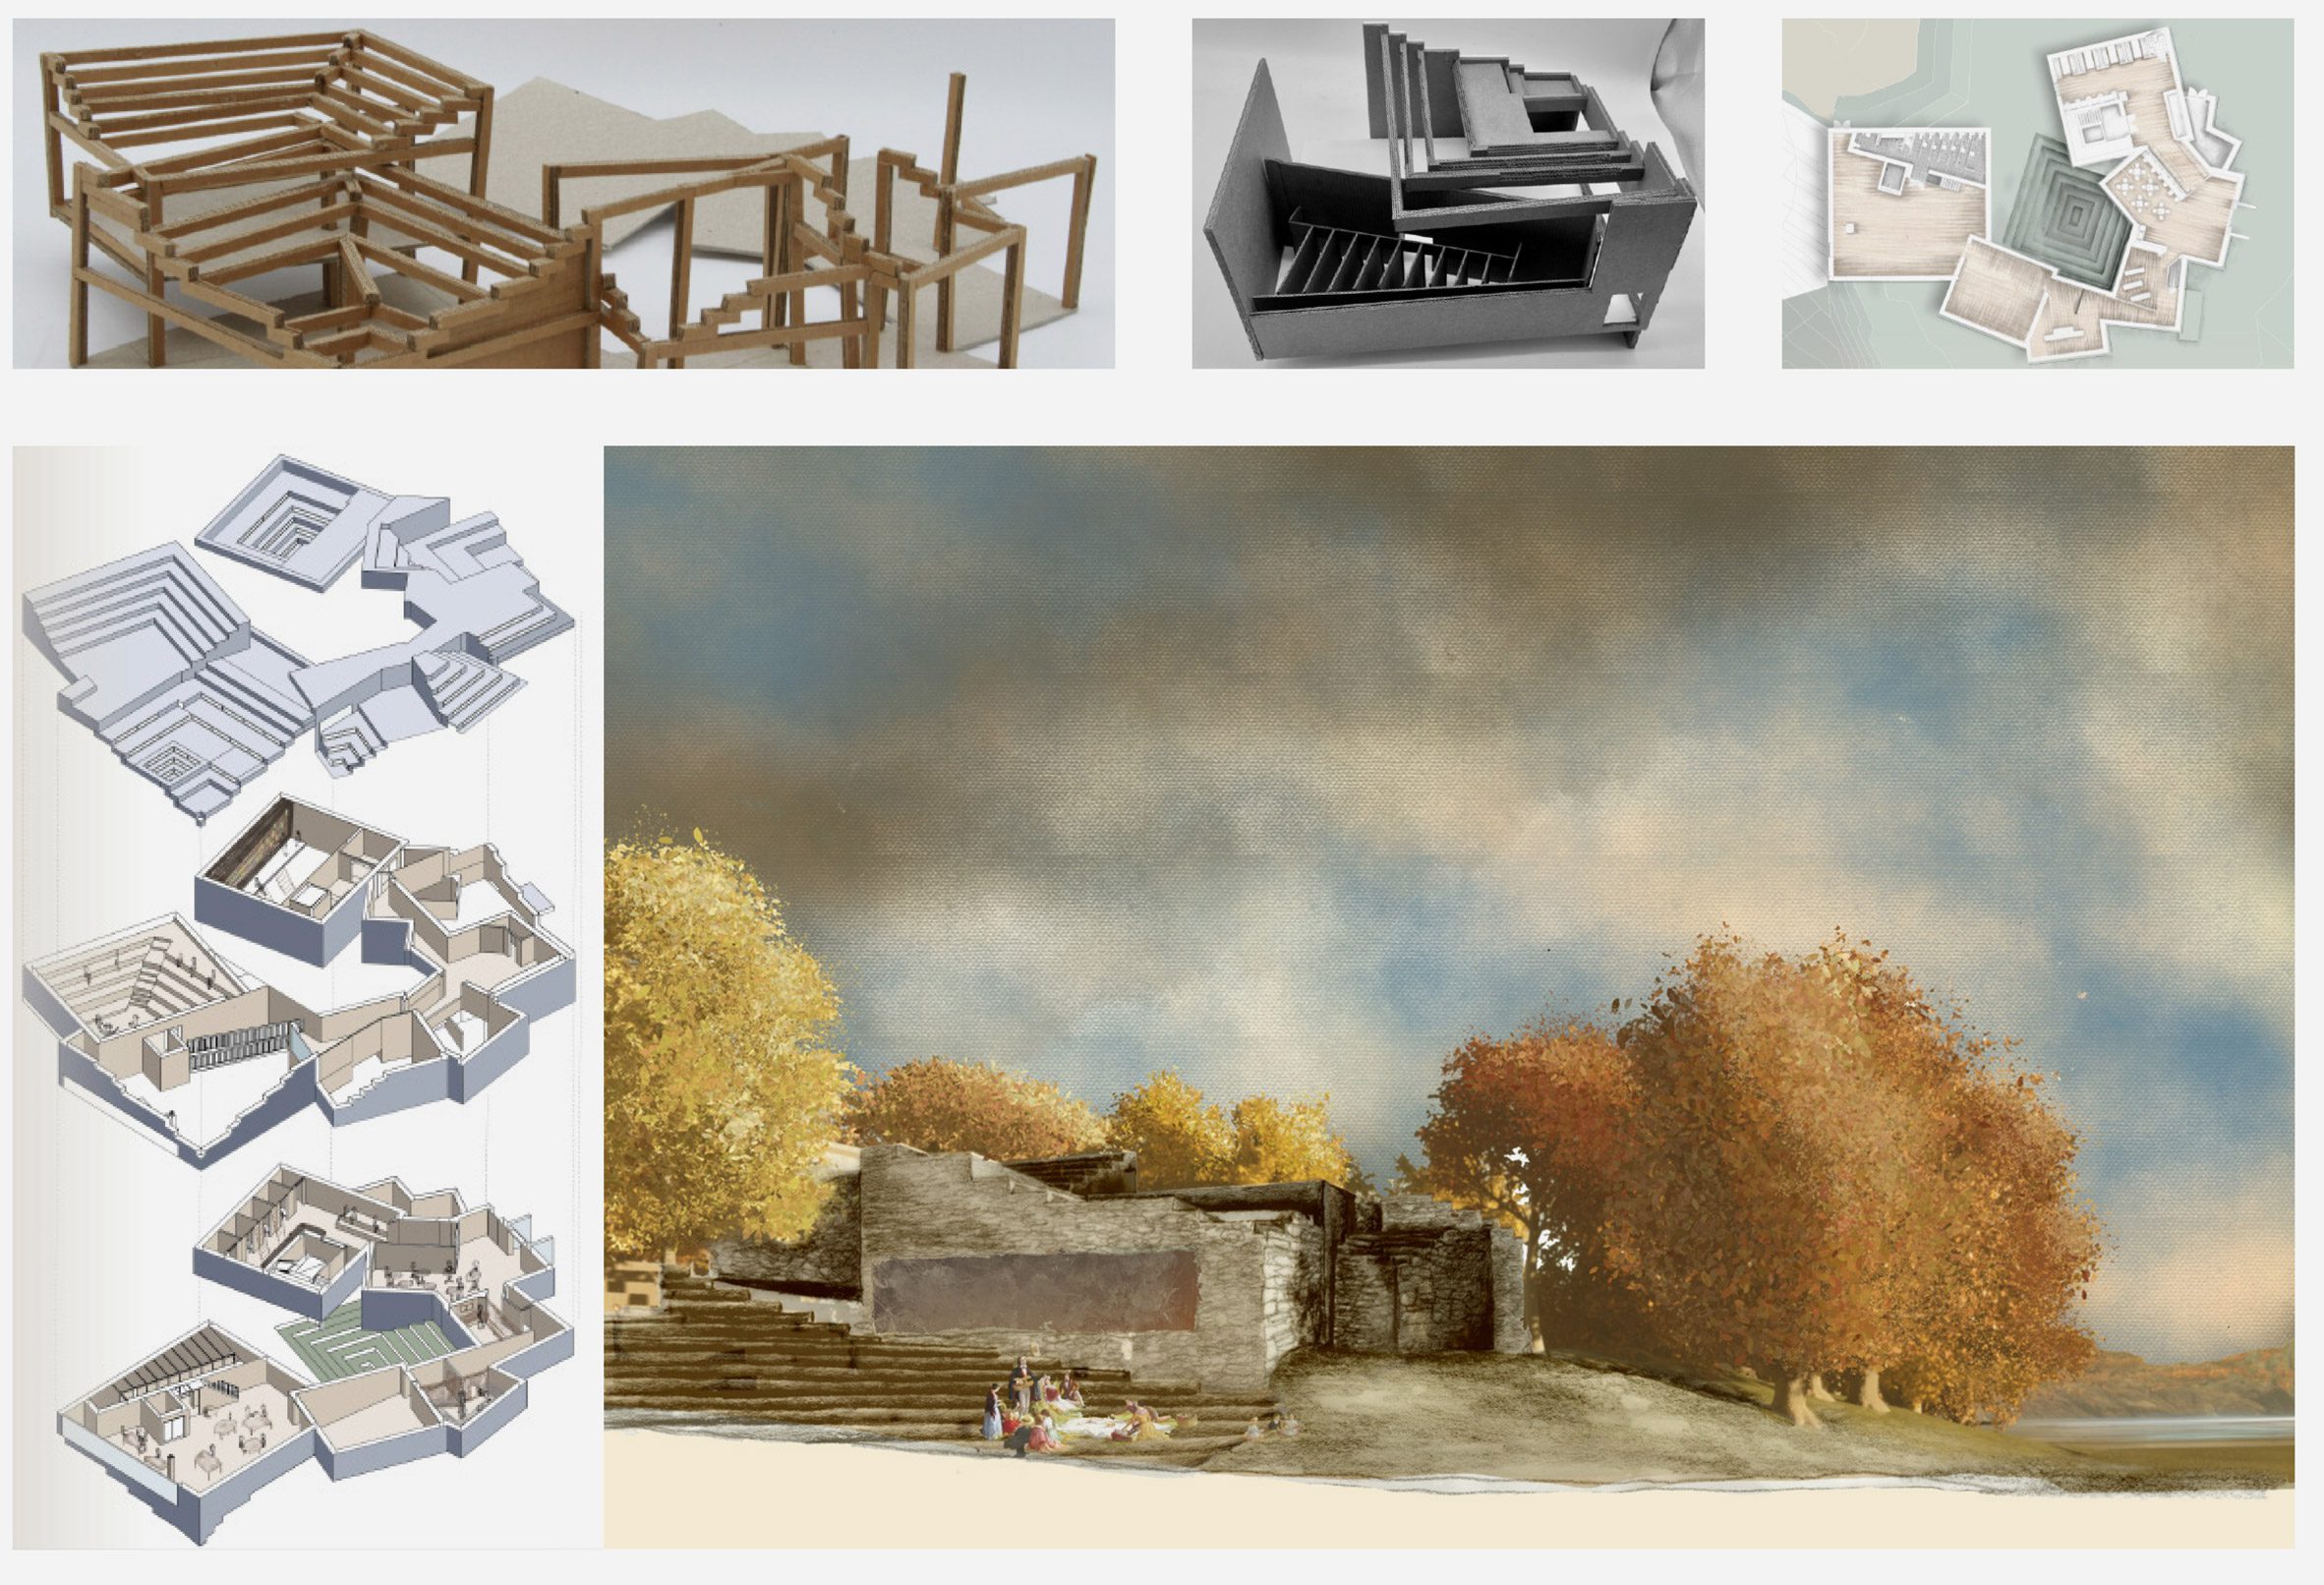 Board showing architectural drawings, models and renderings of a learning centre in the Lake District, England